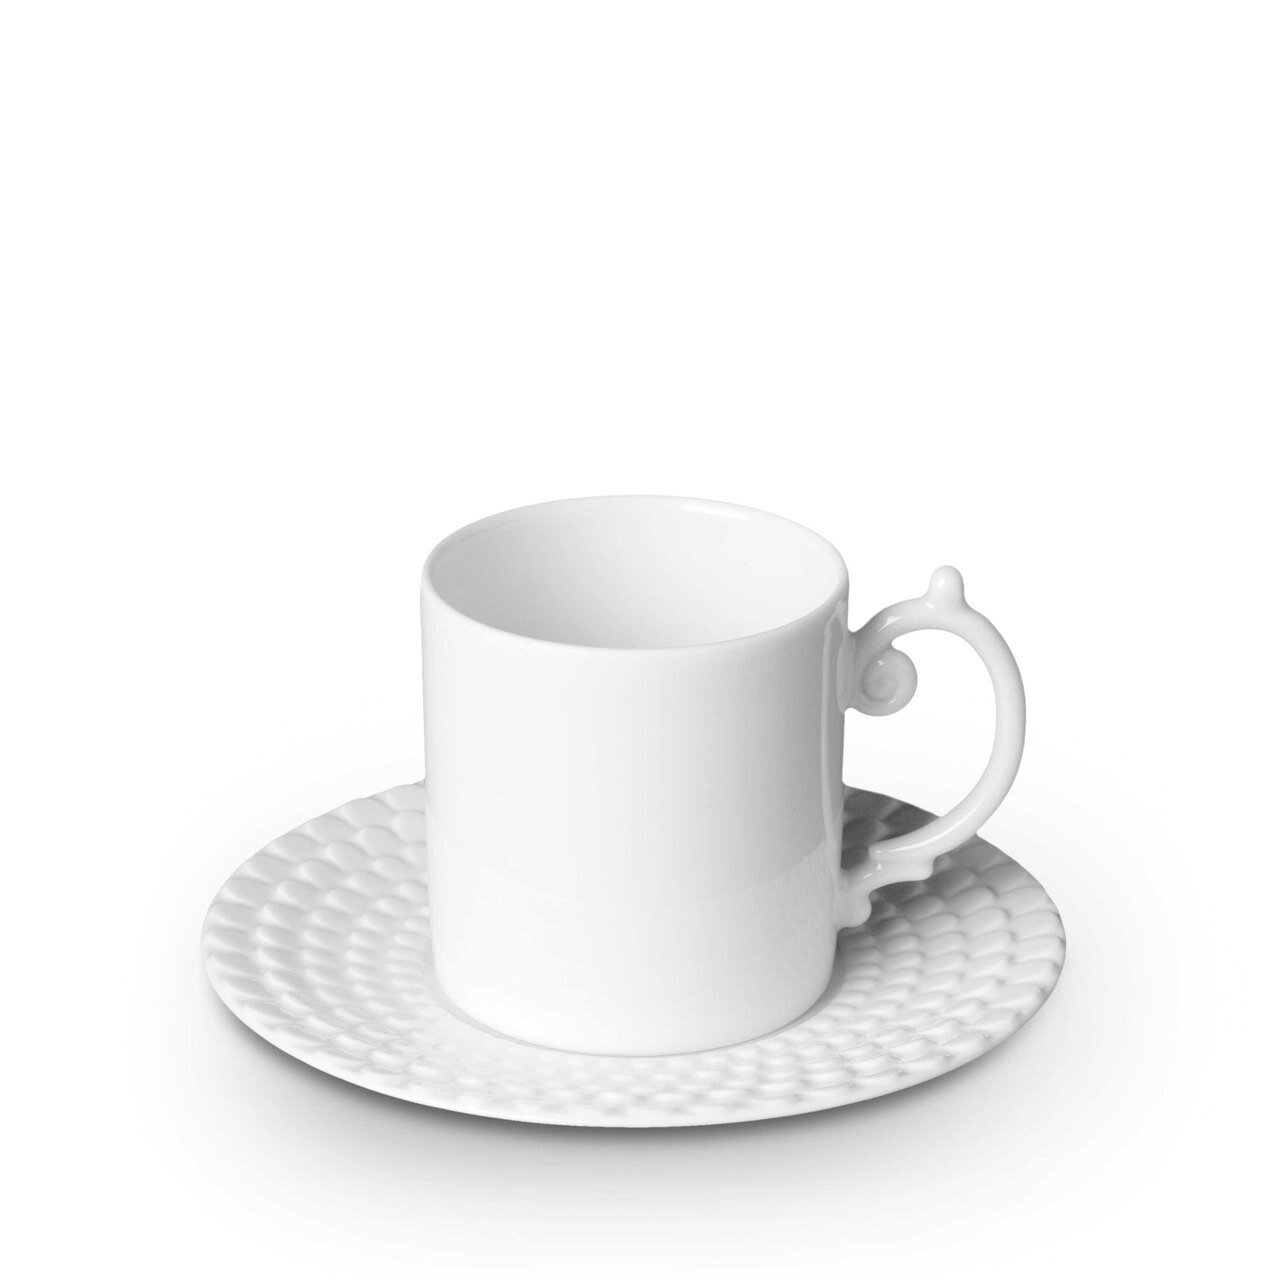 L'Objet Aegean Espresso Cup and Saucer White